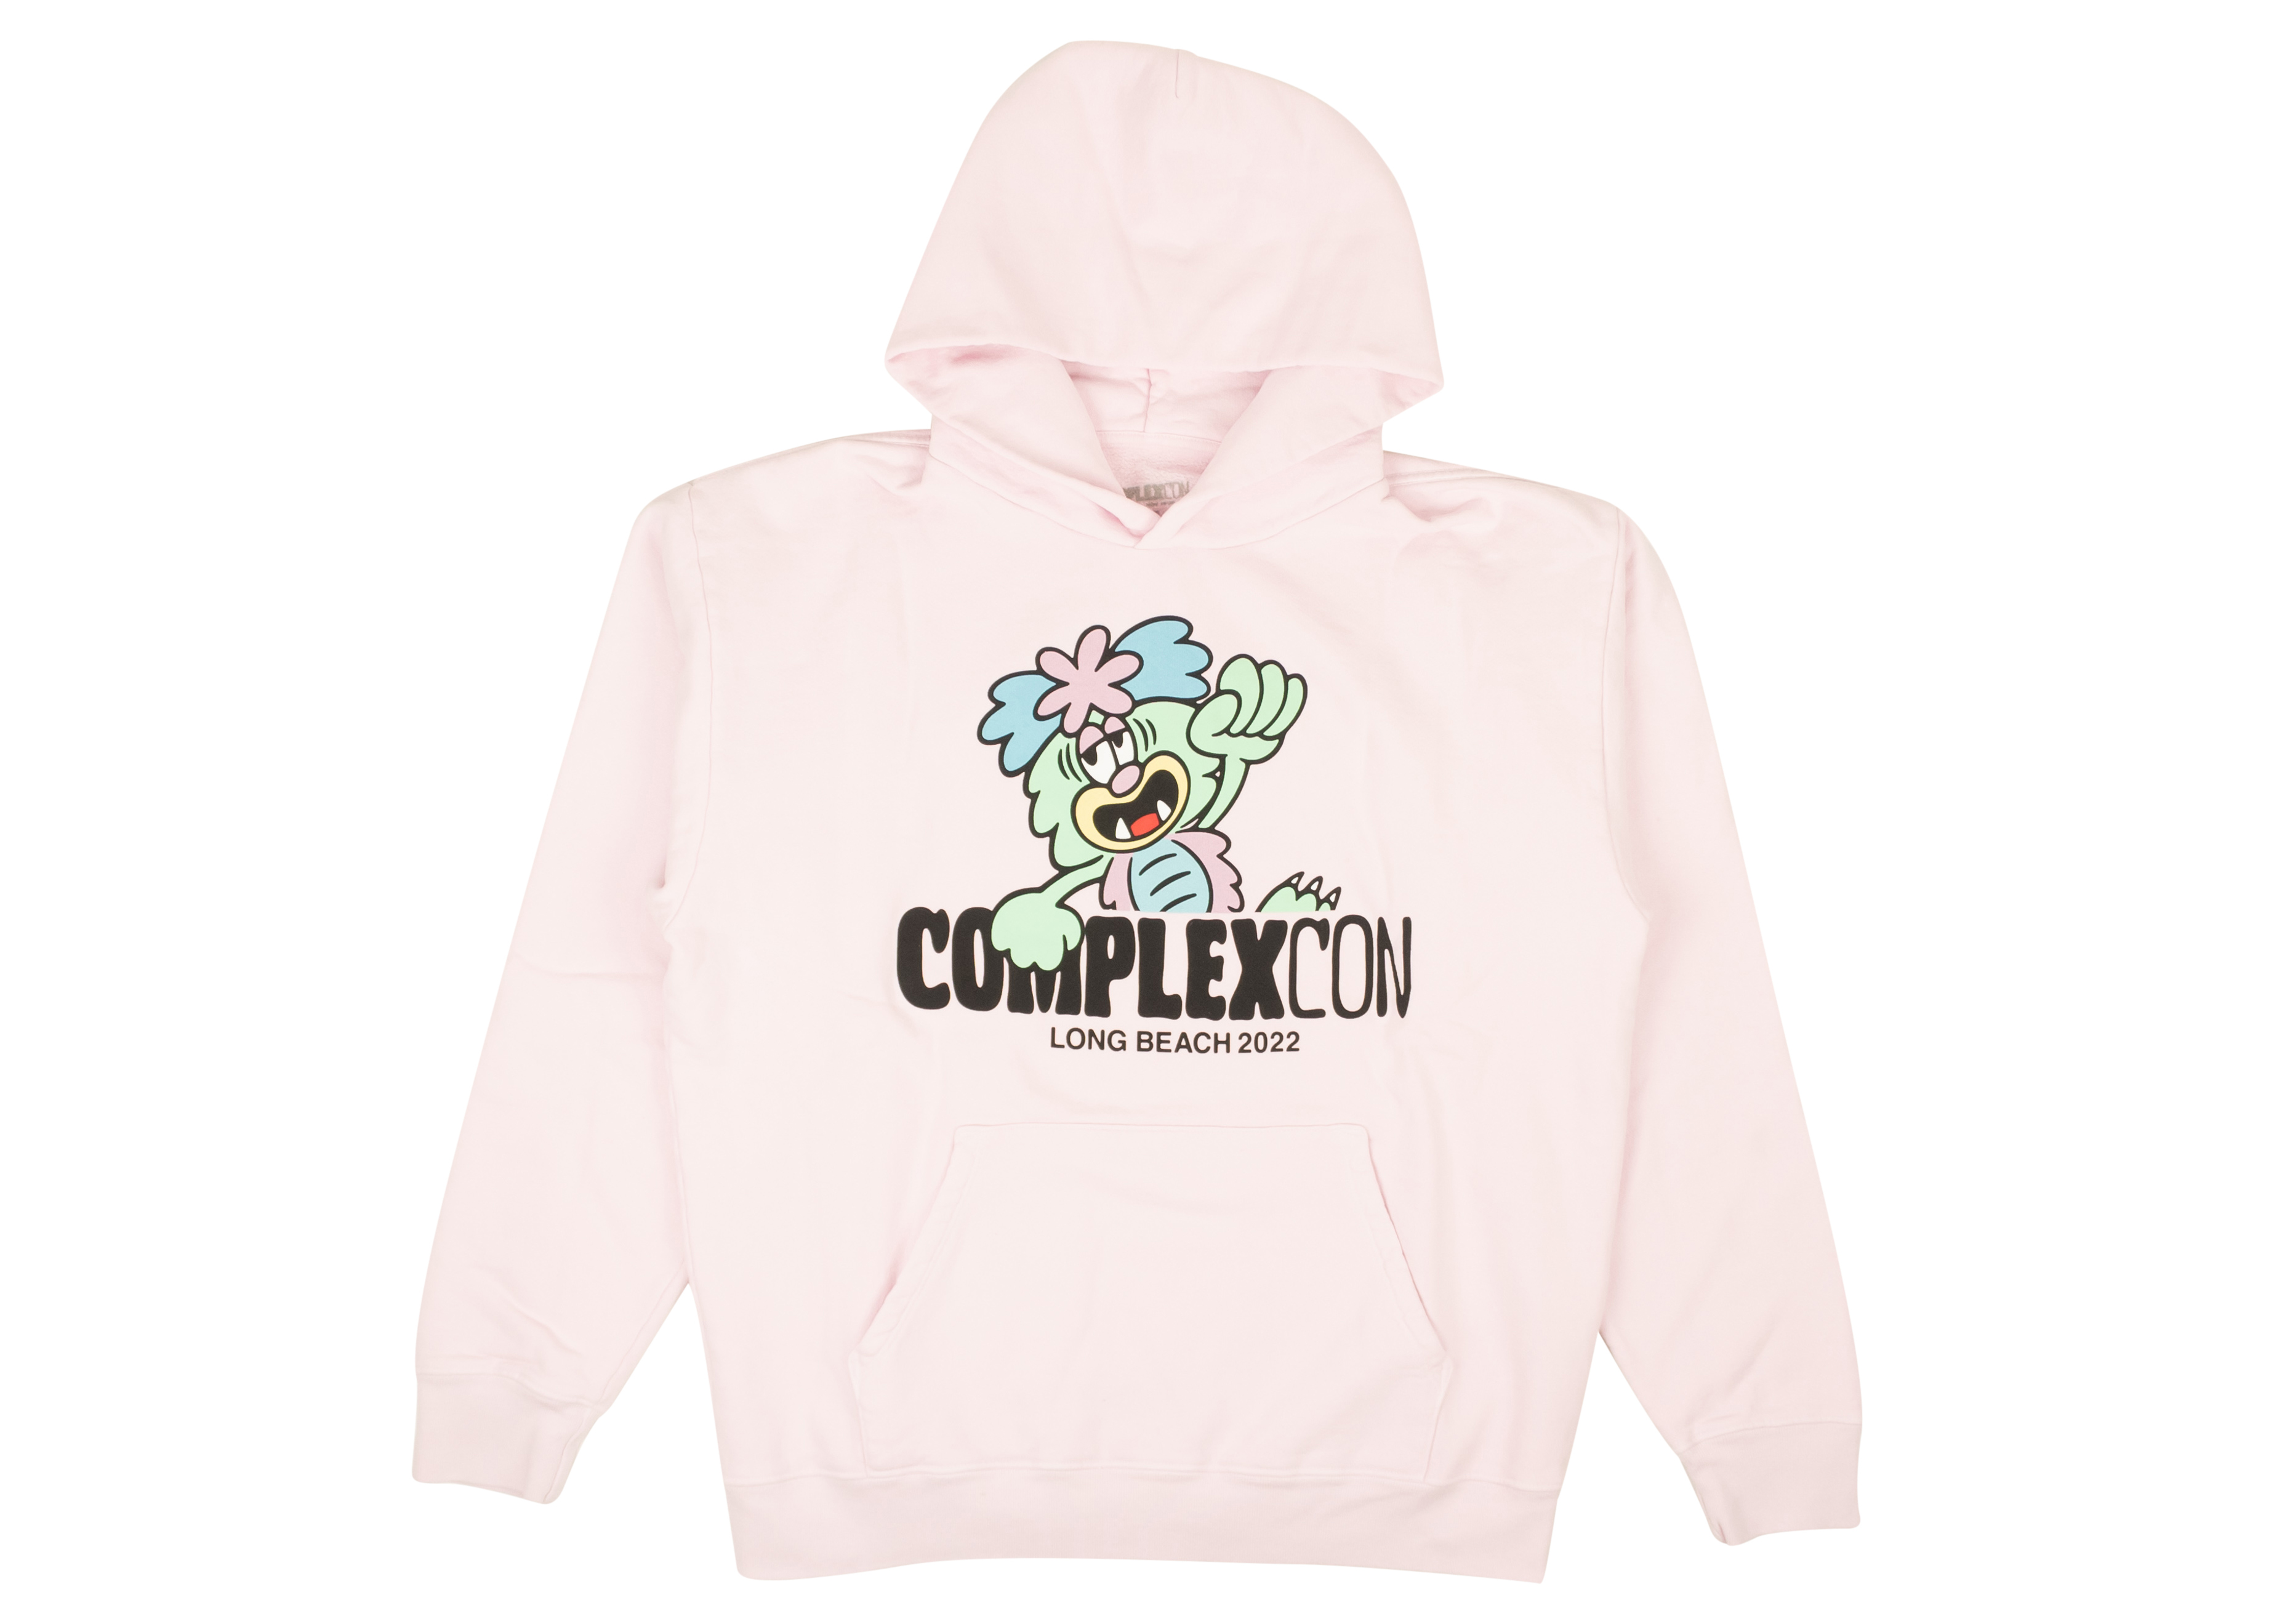 Complexcon x Verdy Pink Logo Graphic Hoodie Pink メンズ - FW22 - JP